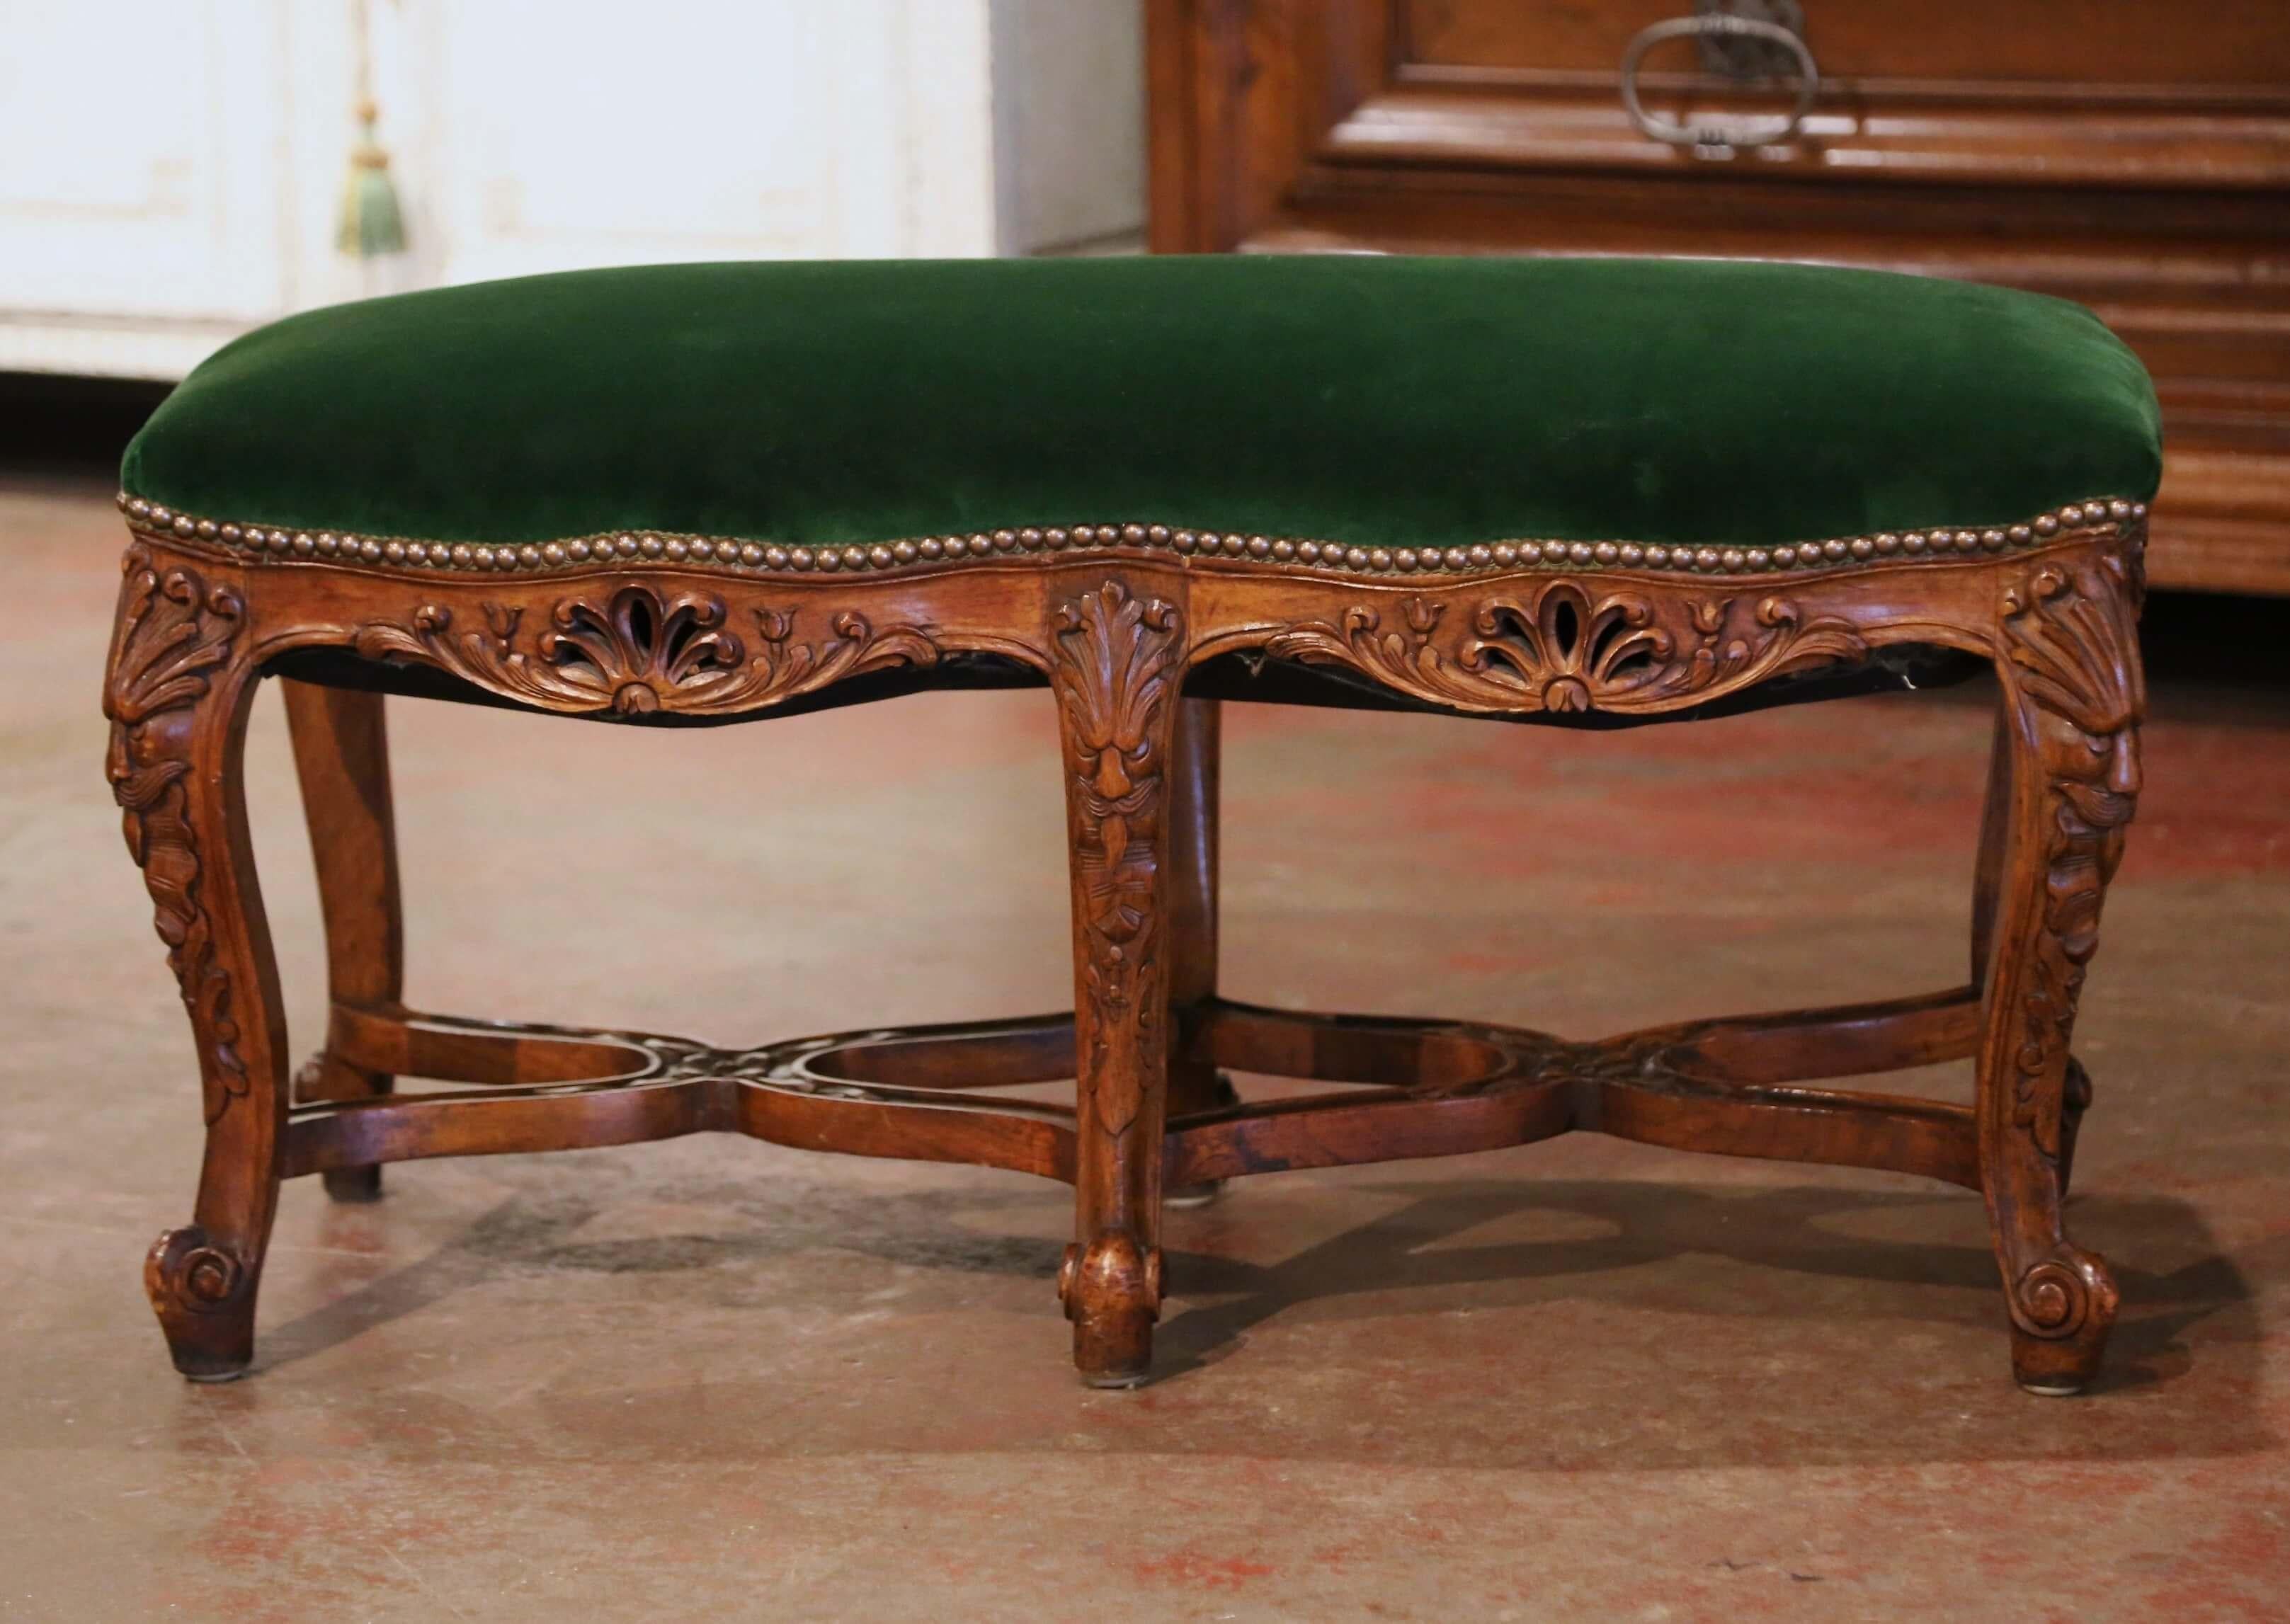 Crafted in Provence, France circa 1920, the antique fruitwood bench stands on six cabriole legs and escargot feet over a curved stretcher at the base; each leg is further decorated with hand carved acanthus leaf and face motifs at the shoulder. The